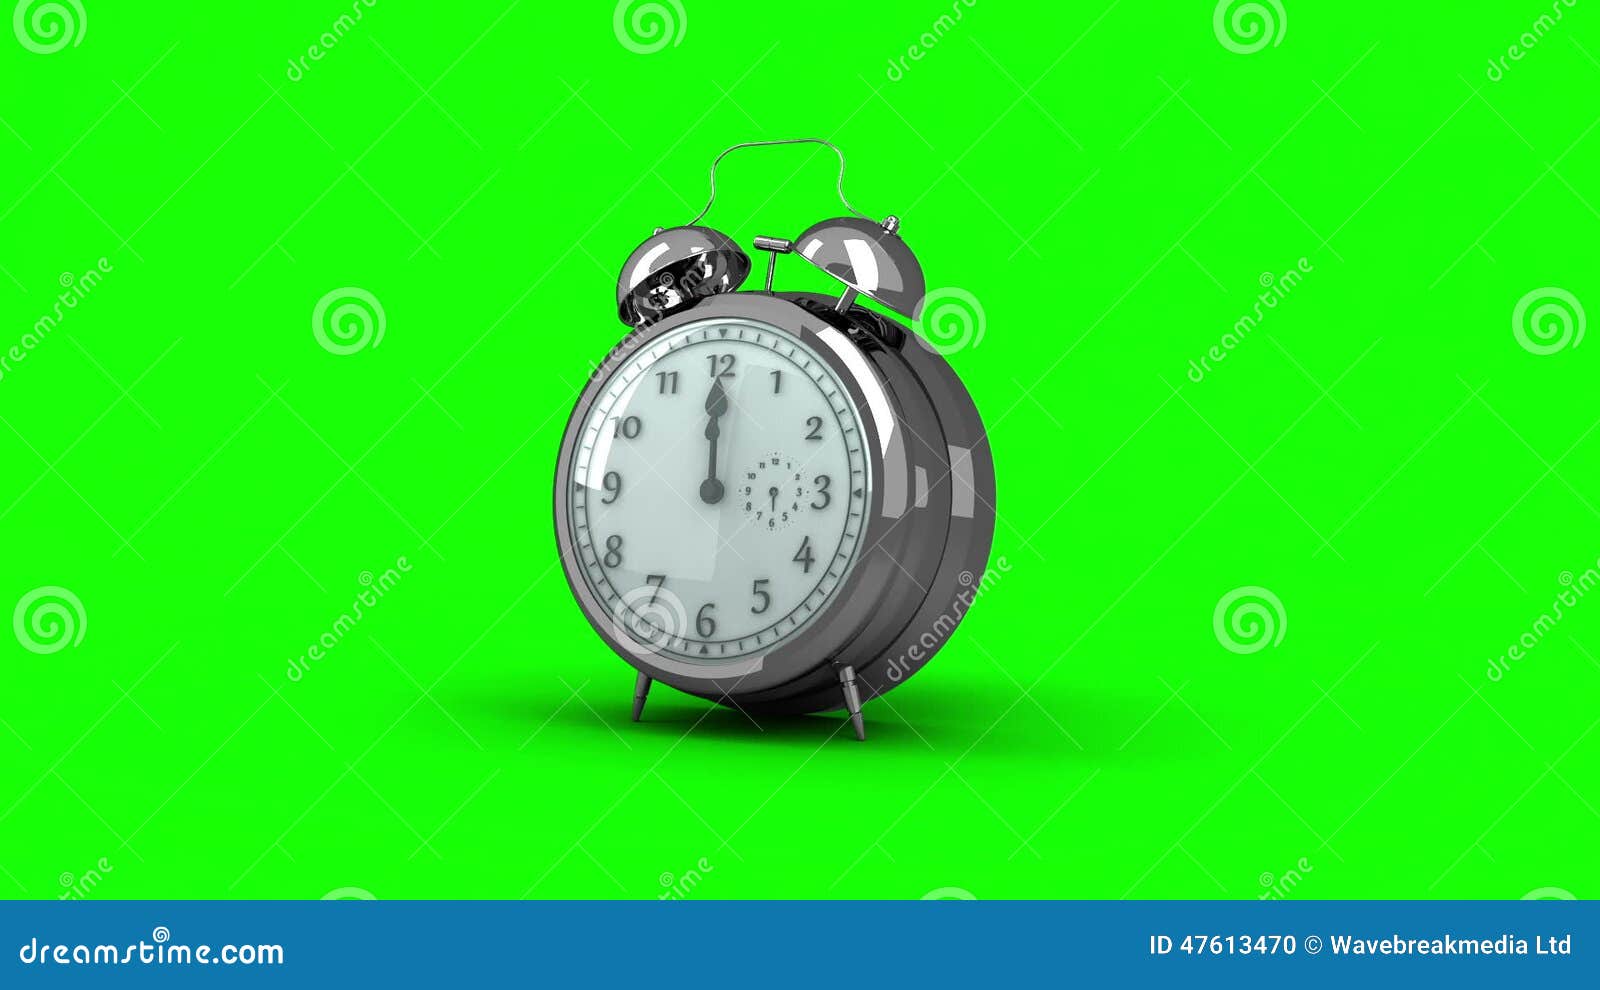 Alarm Clock Ringing on Green Background Stock Footage - Video of montage,  digitally: 47613470